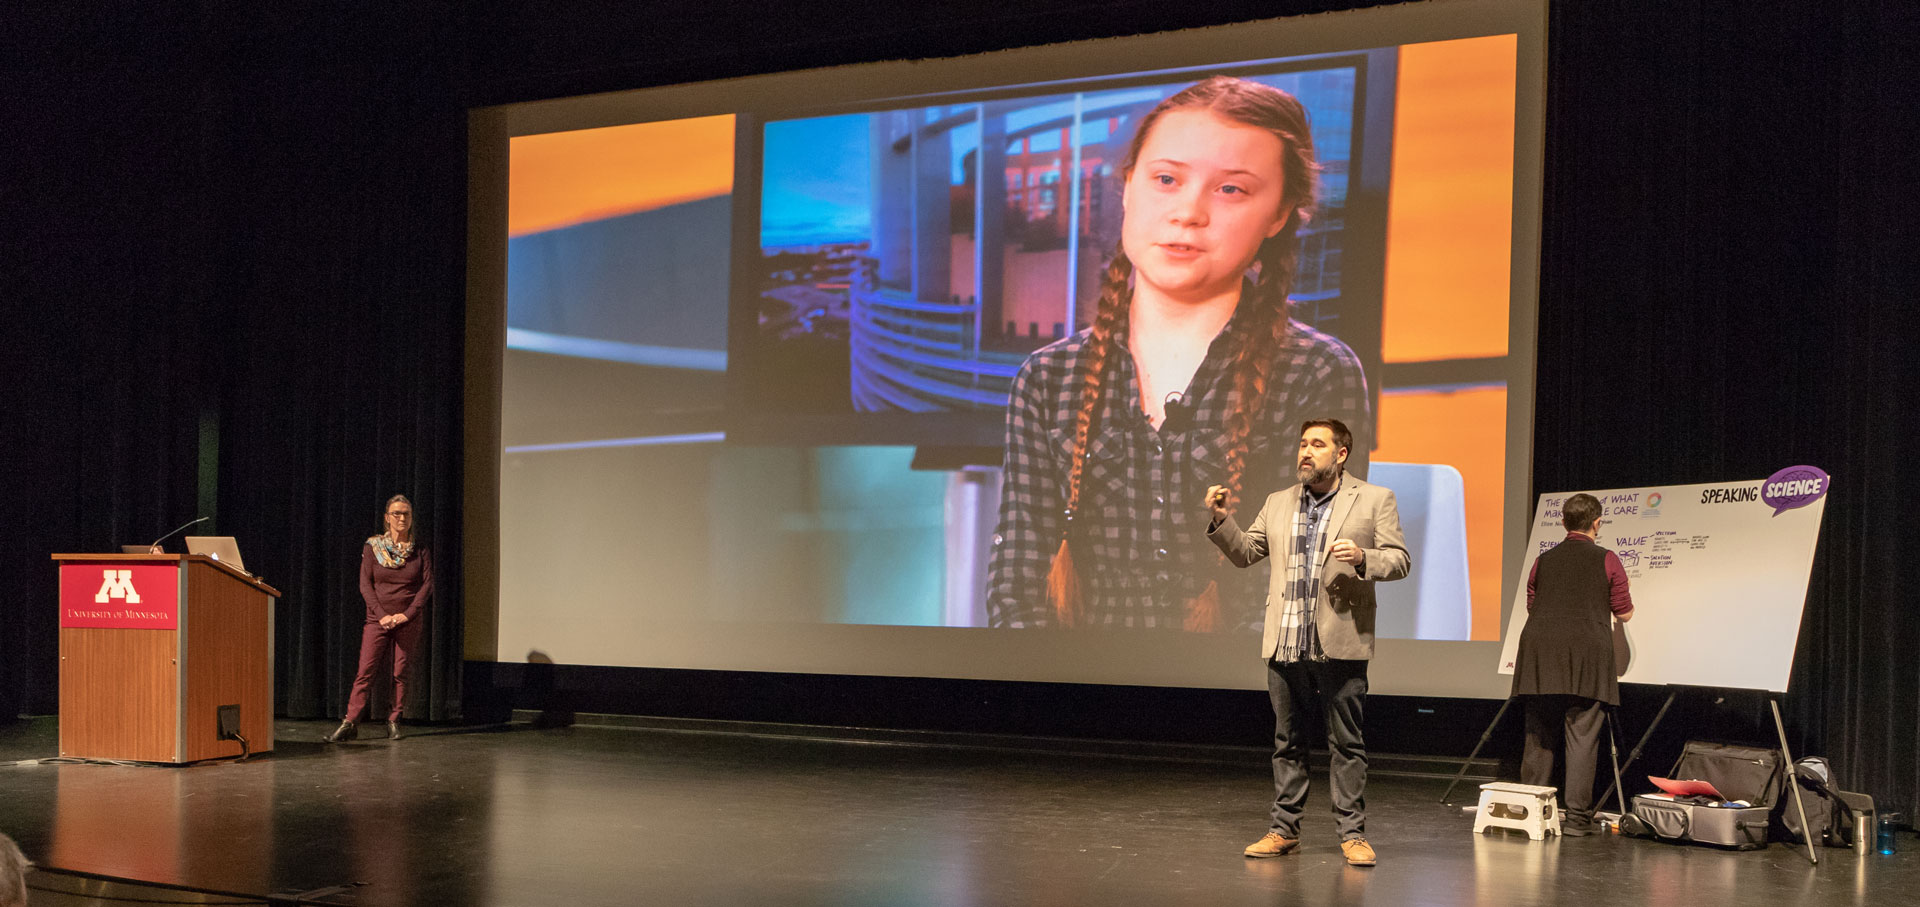  A speaker stands on stage at Speaking Science 2020. A visual of environmental activist Greta Thunberg appears on the screen behind them.